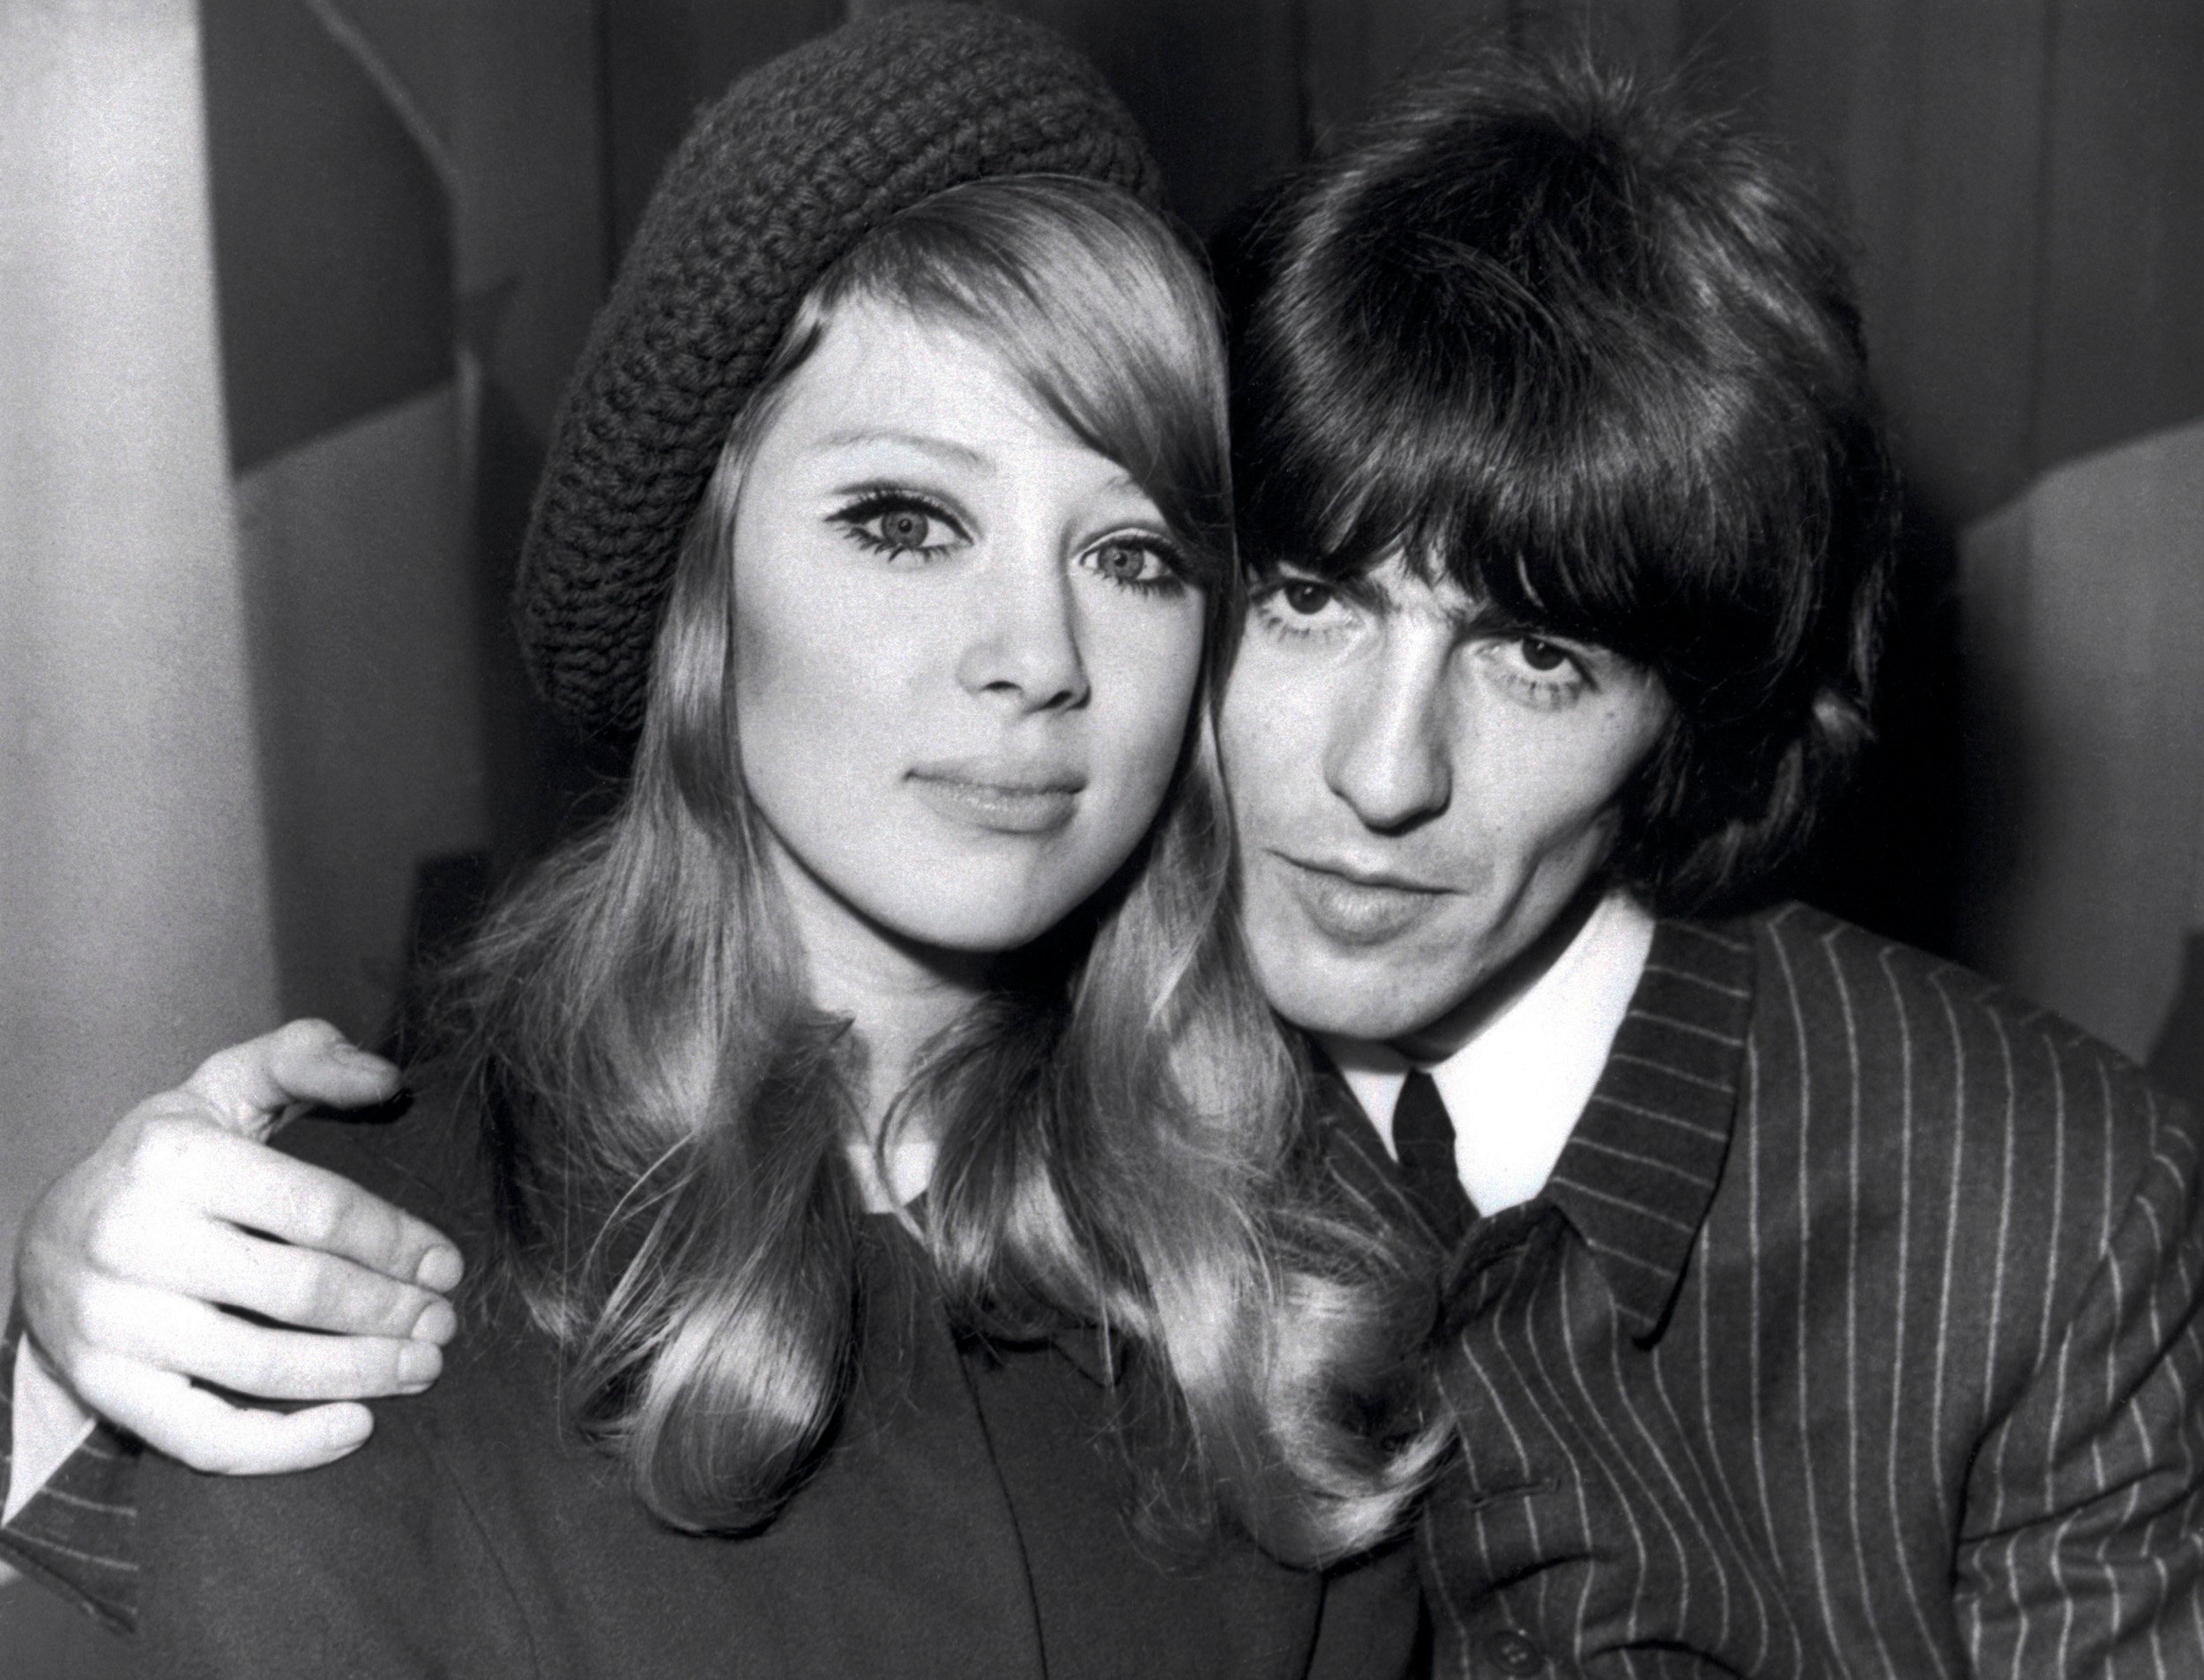 A black and white picture of George Harrison sitting with his arm around Pattie Boyd. 